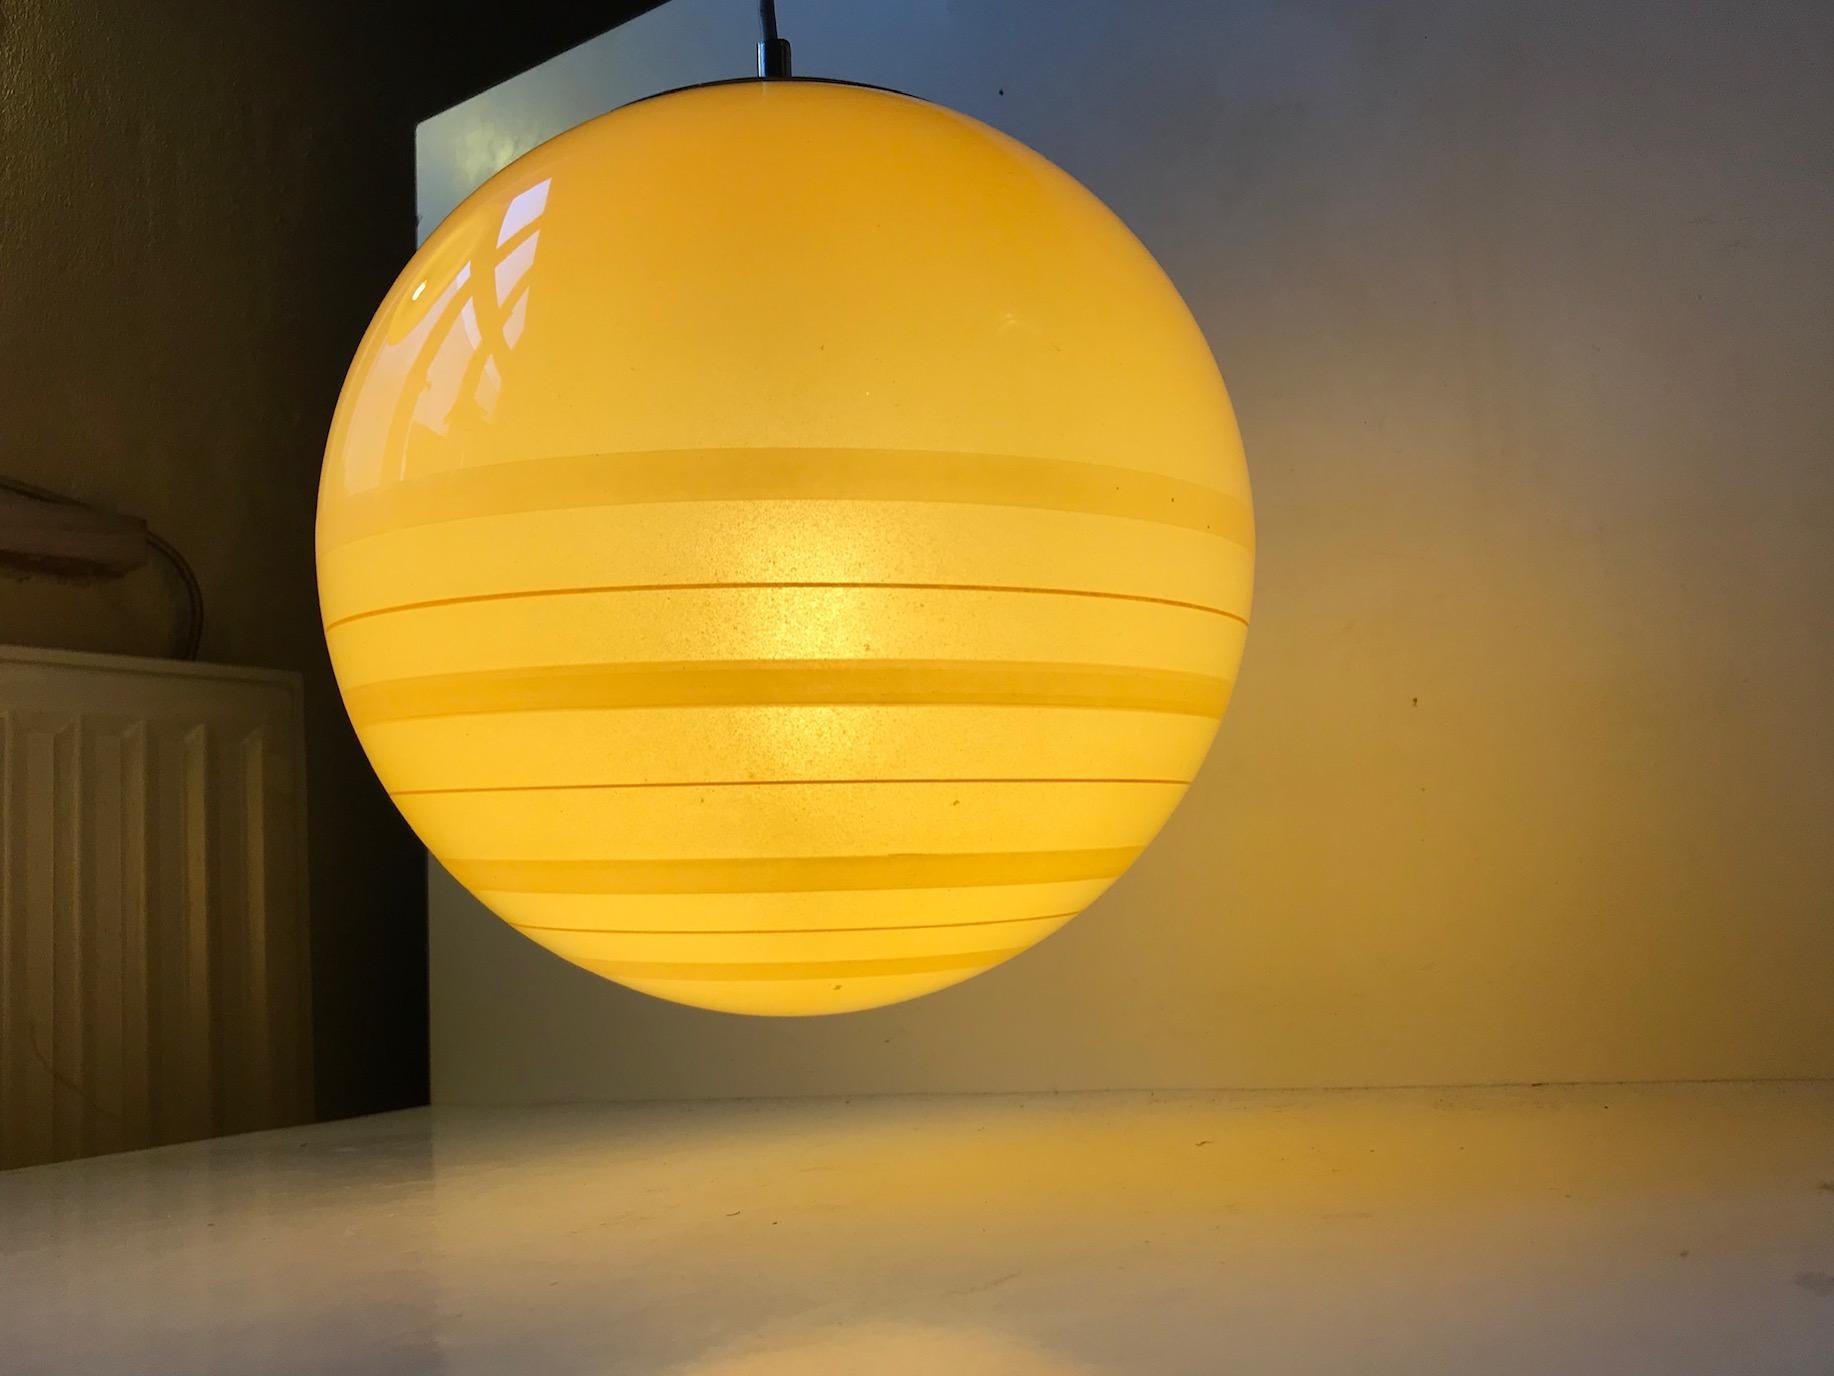 A rare spherical pendant light in yellow opaline glass the half of which is decorated with horizontal stribes. It has a nickel plated top that allows for easy access when the bulb need to be changed. It was manufactured by Peill & Putzler in Germany